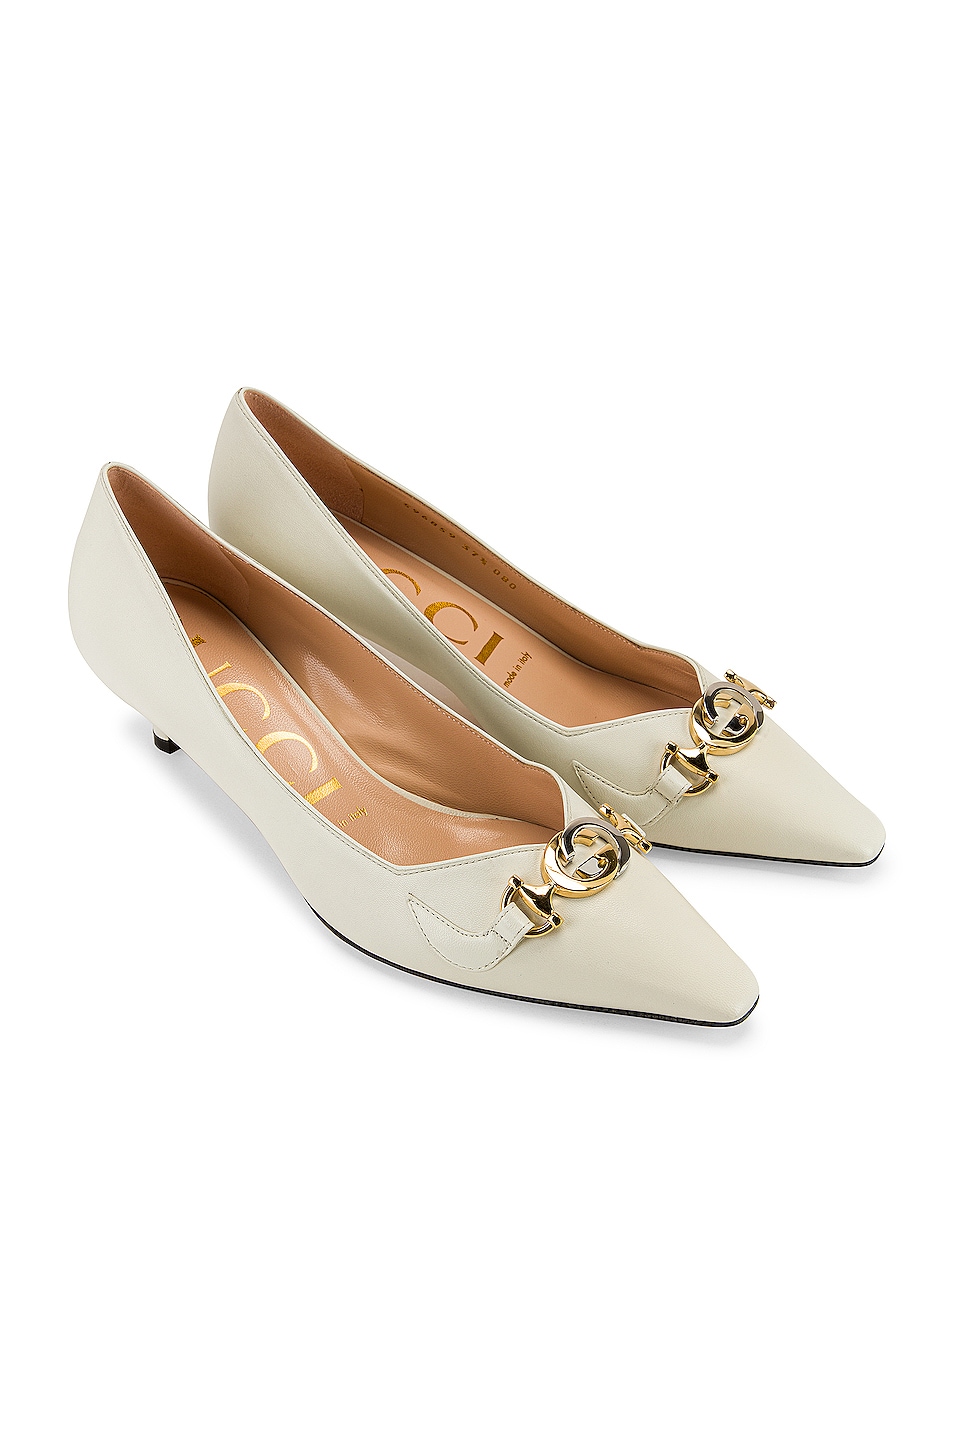 Image 1 of Gucci Low Heel Pumps in Dusty White